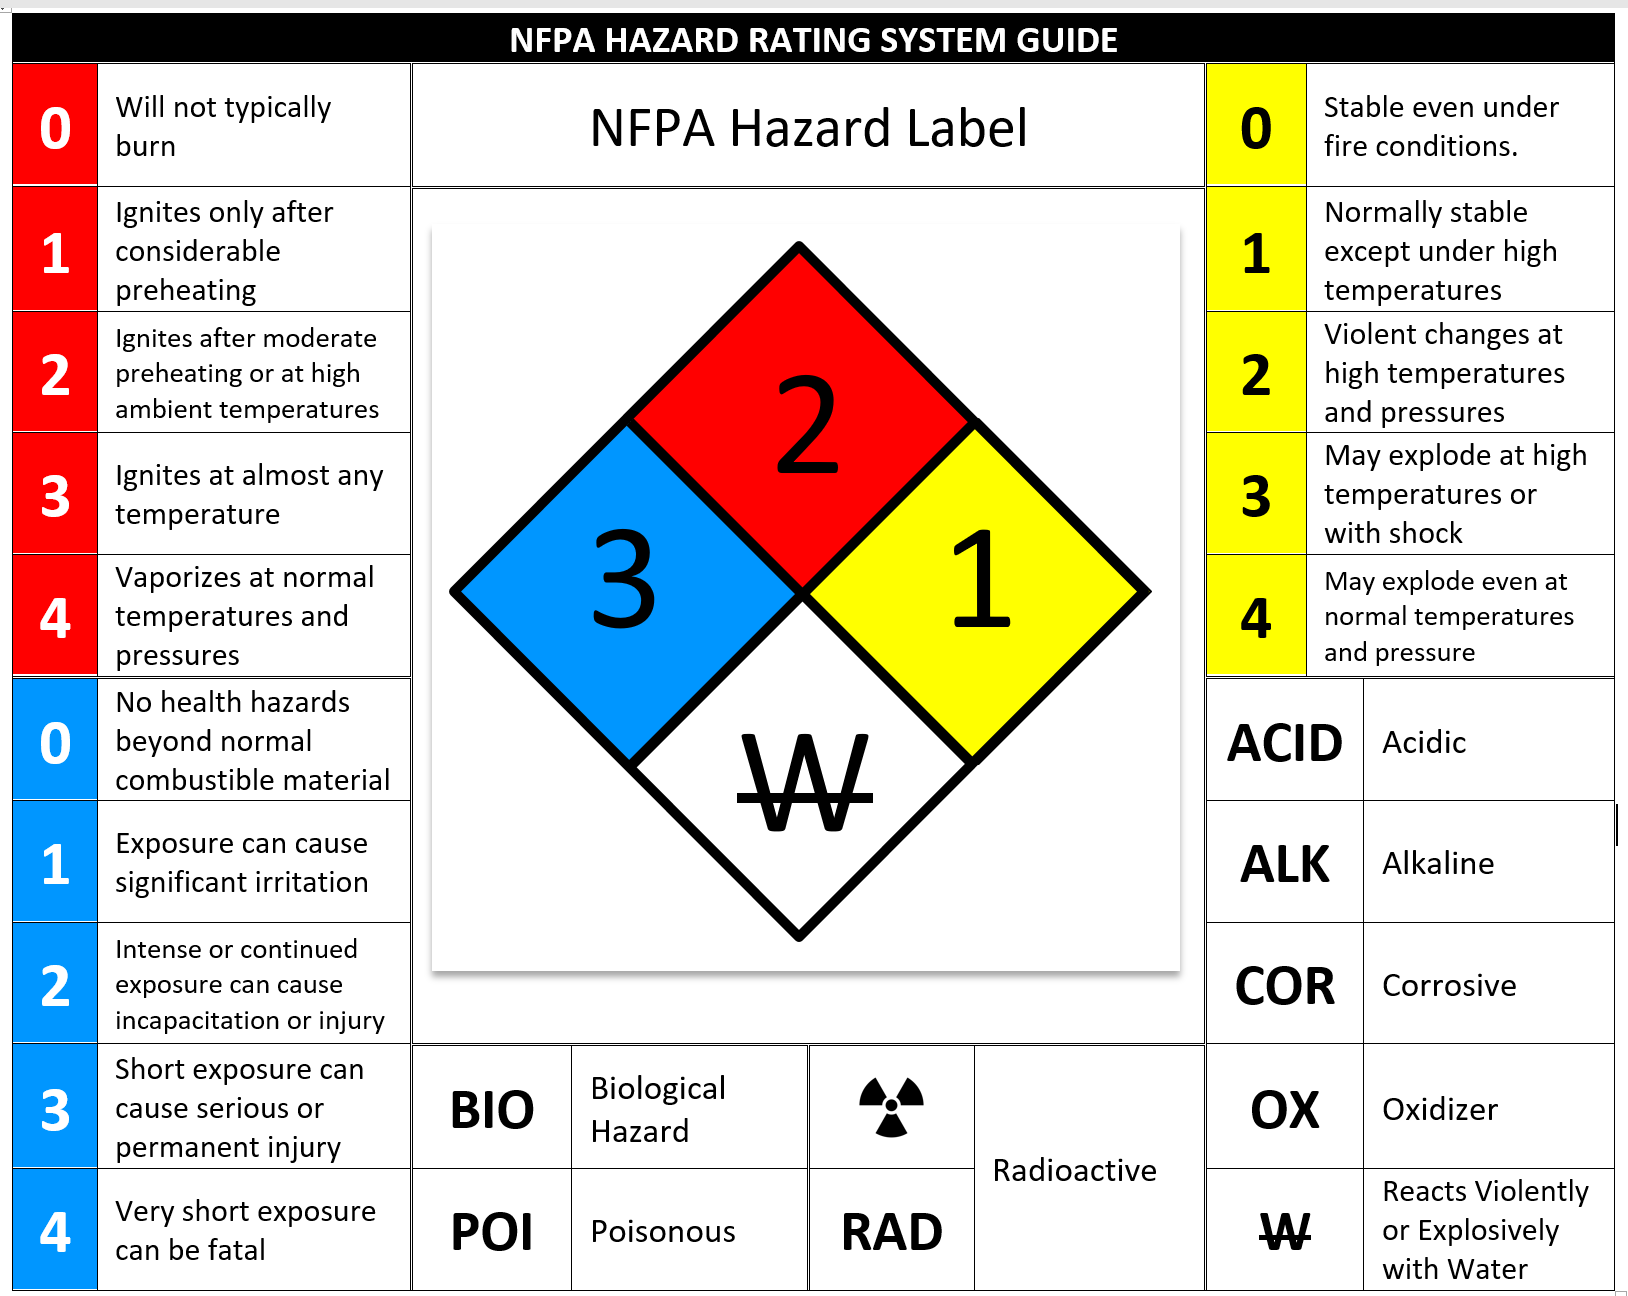 complex image explaining the NFPA Hazard Rating System